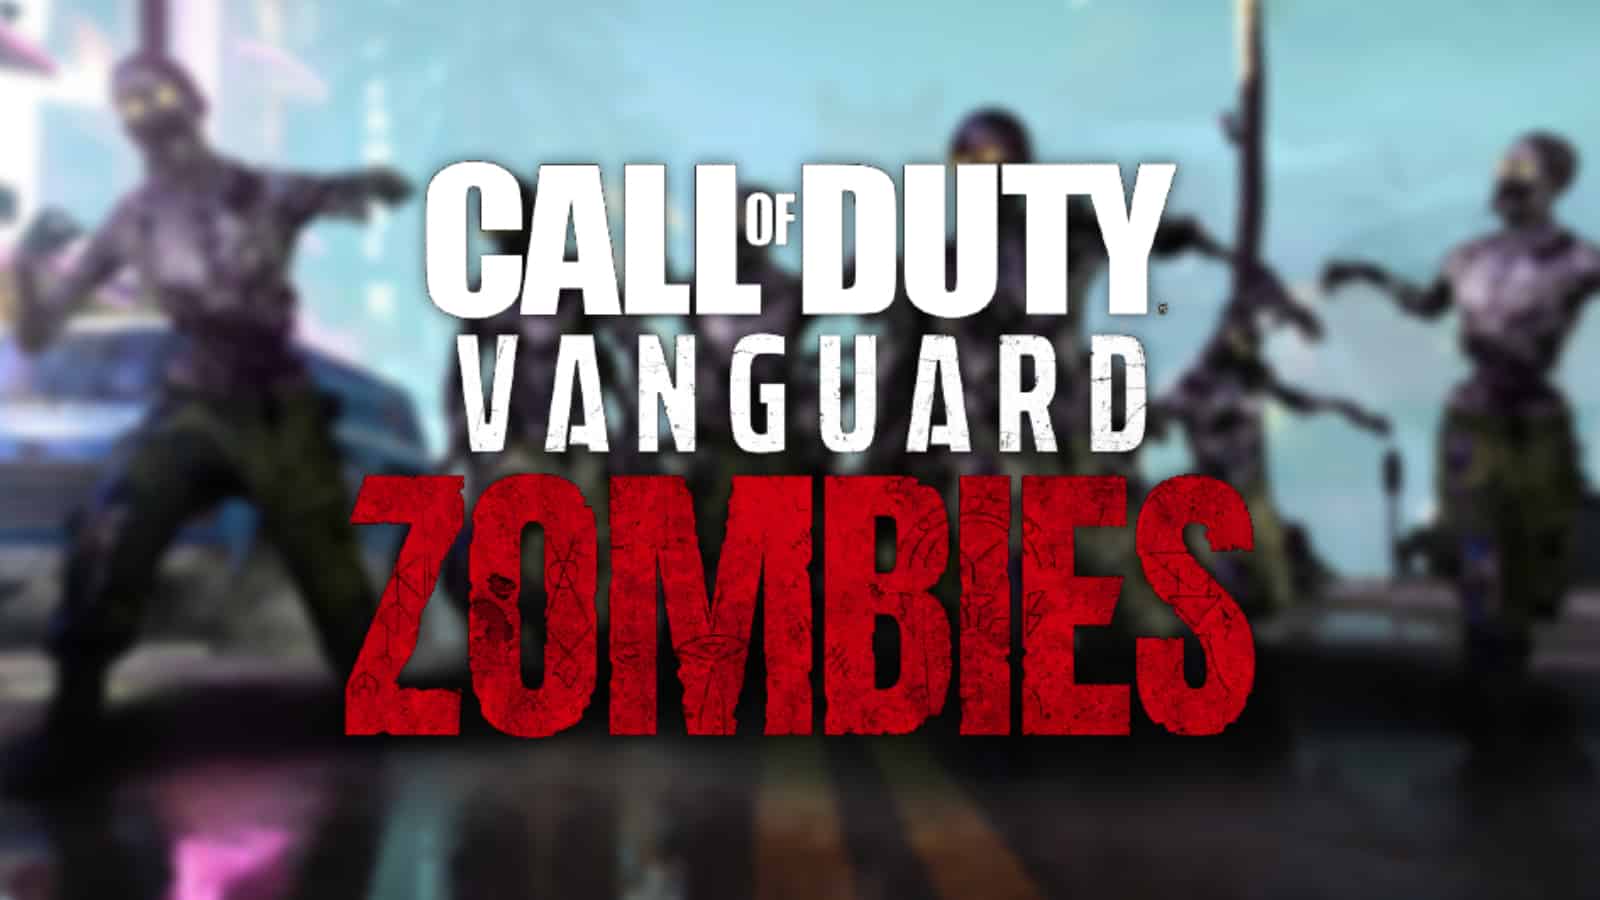 CoD Zombies fans hyped as Vanguard teaser shows demons & official reveal date